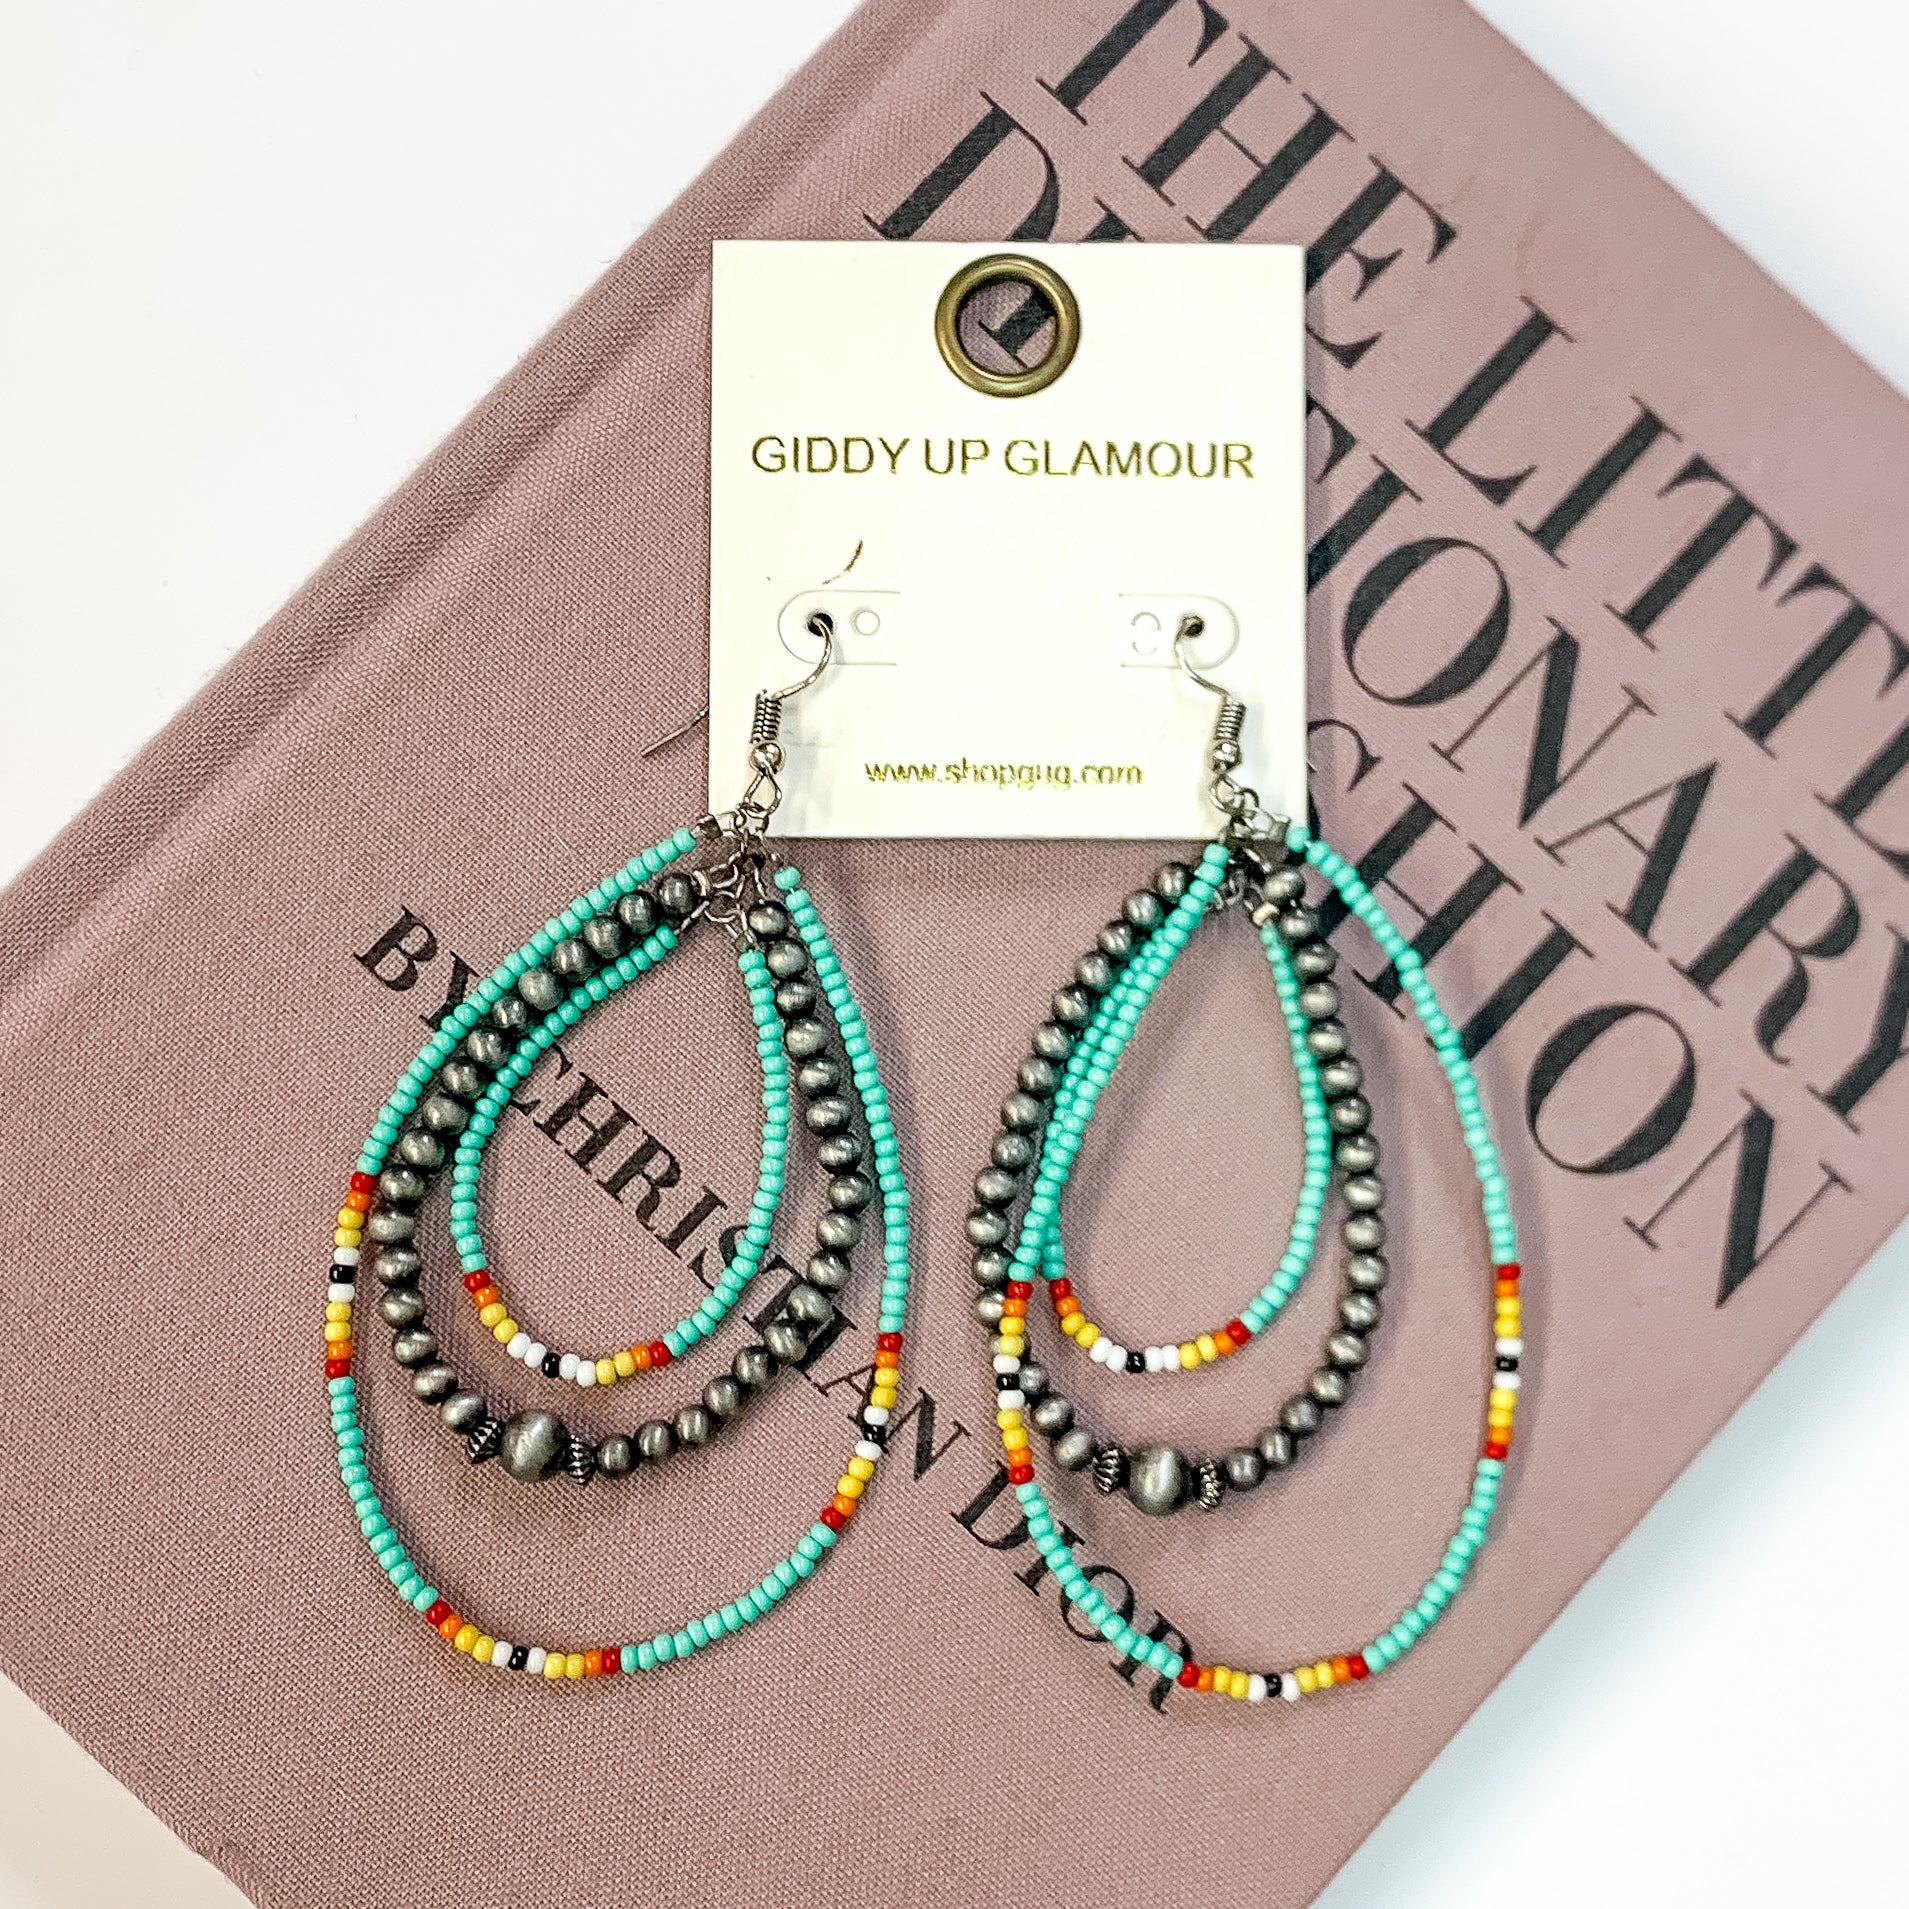 Aztec Seed Beaded Teardrop Earrings with Faux Navajo Beads in Turquoise Green